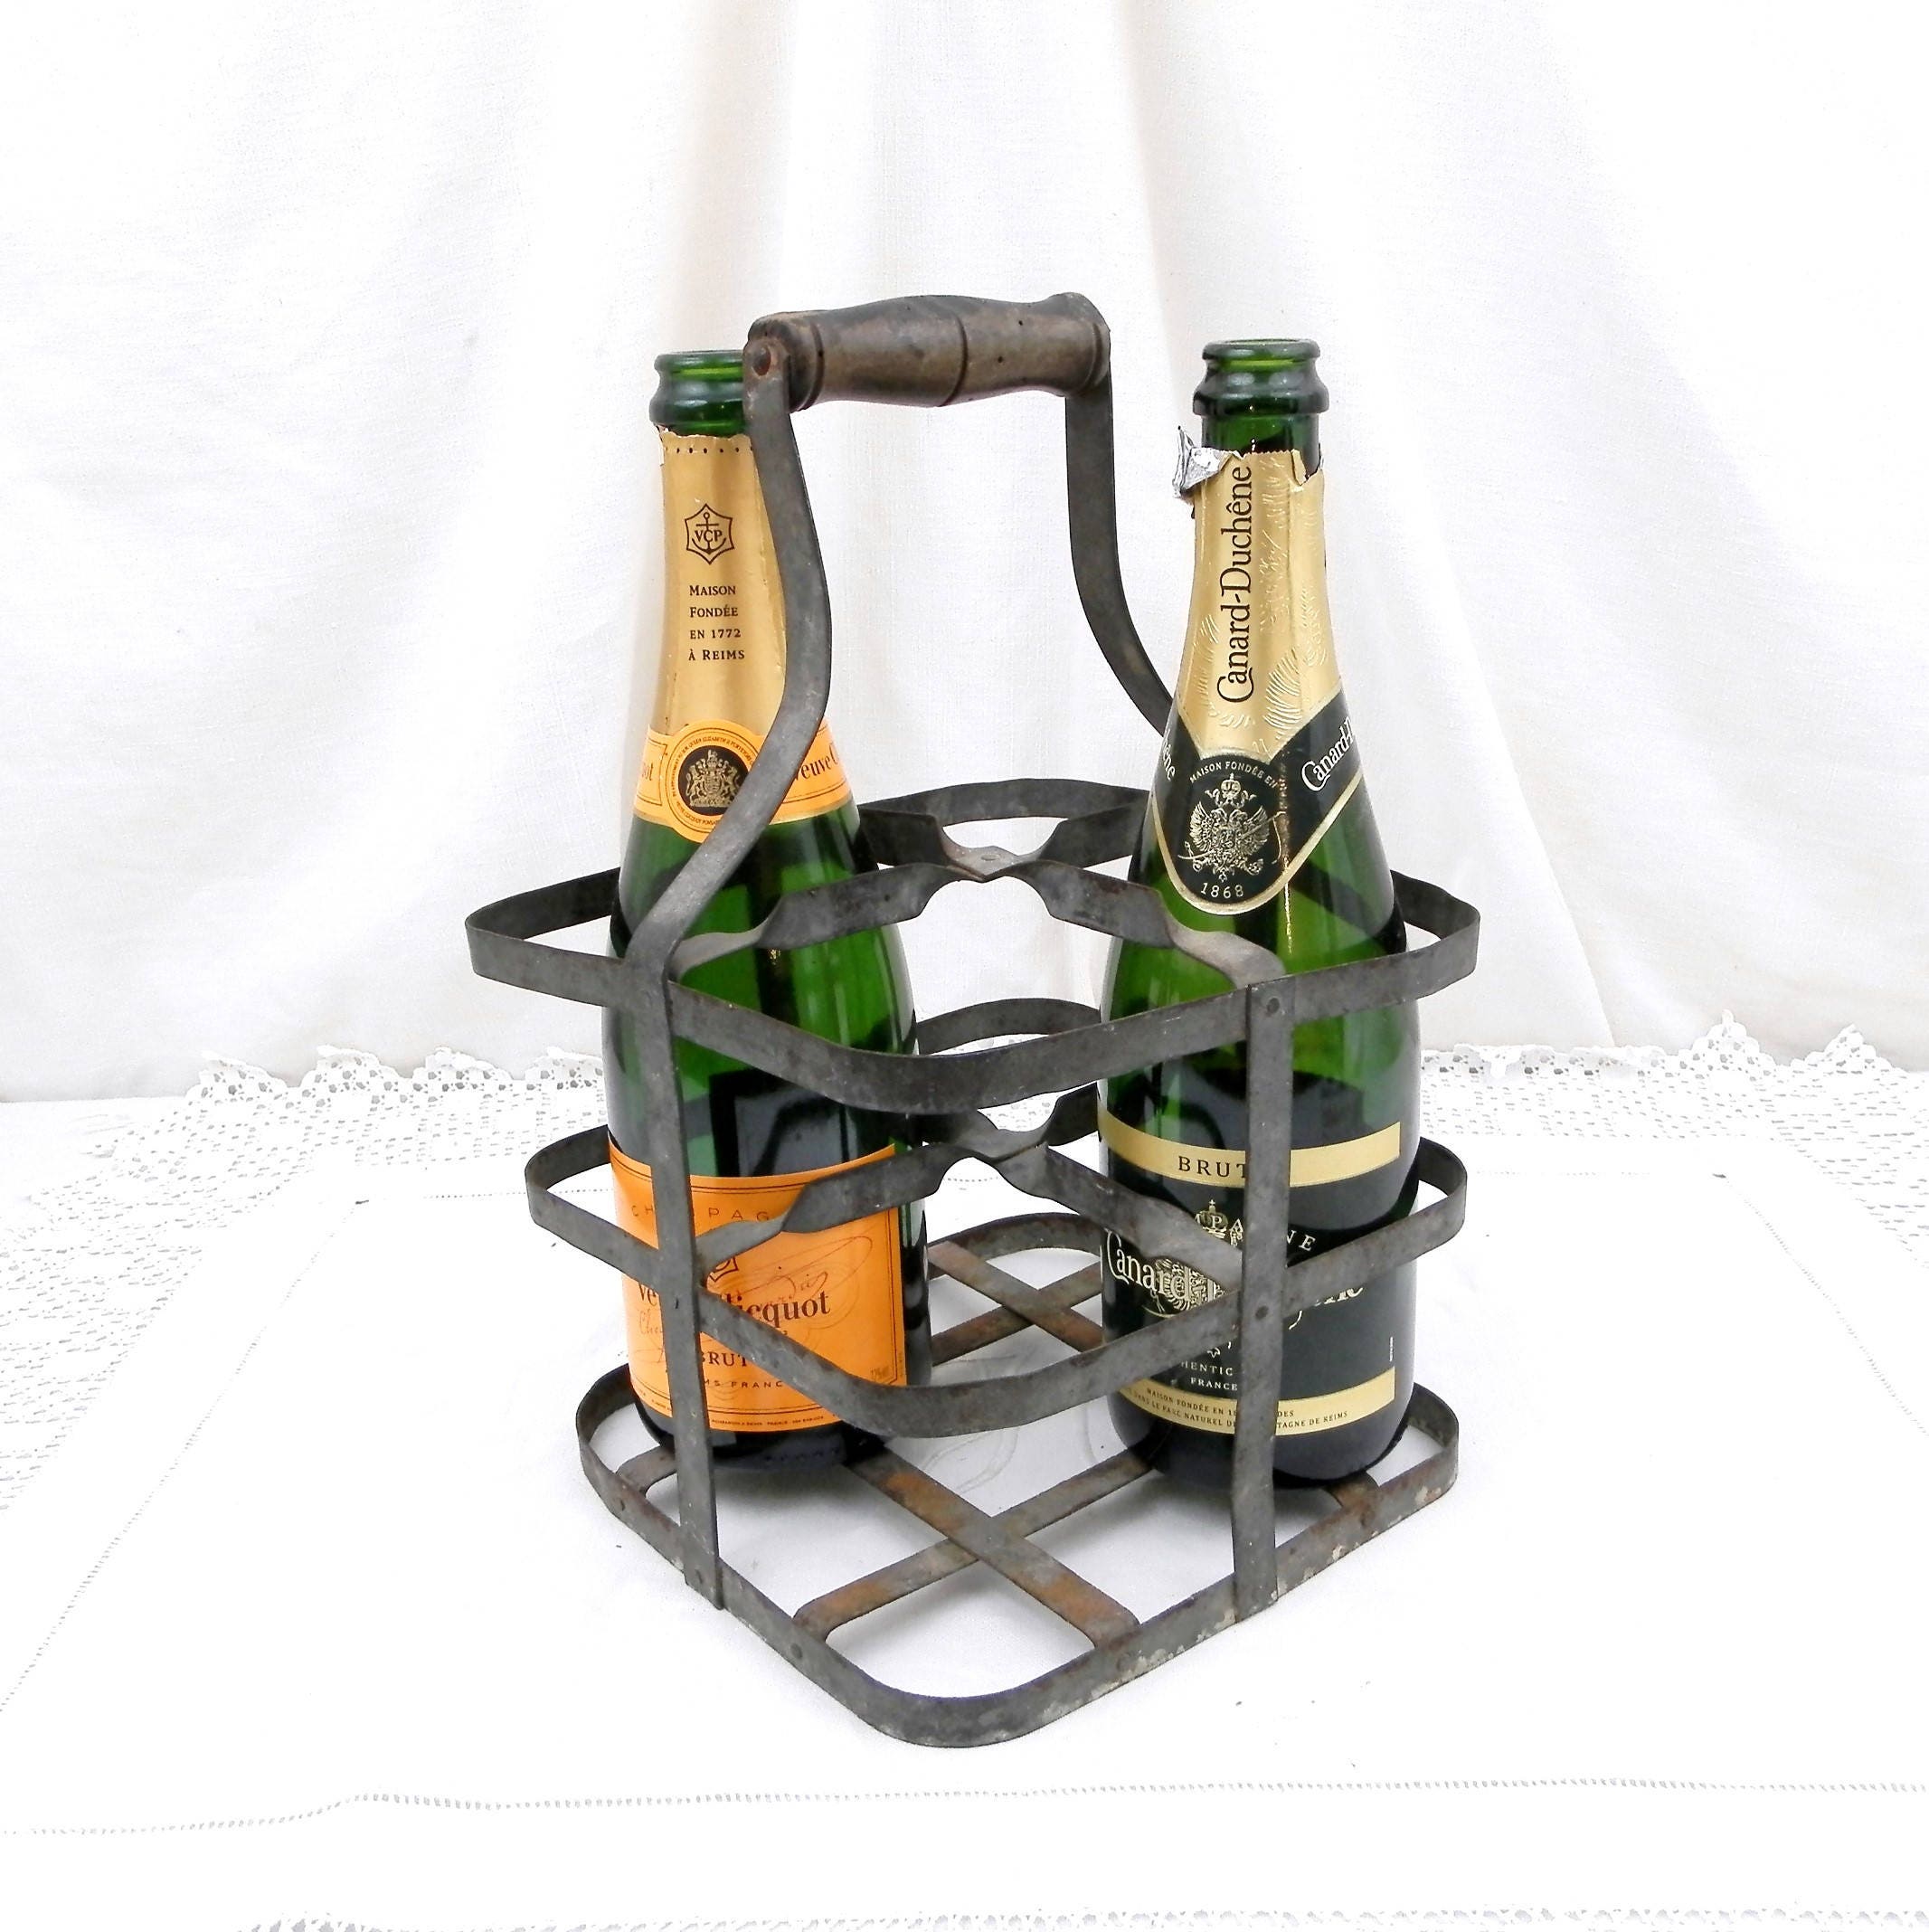 Antique French Metal Wine Bottle Carrier for 4 Bottles, French Country  Decor, Shabby, Chic, Champagne Bottle Holder, Cellar, Picnic, Kitchen